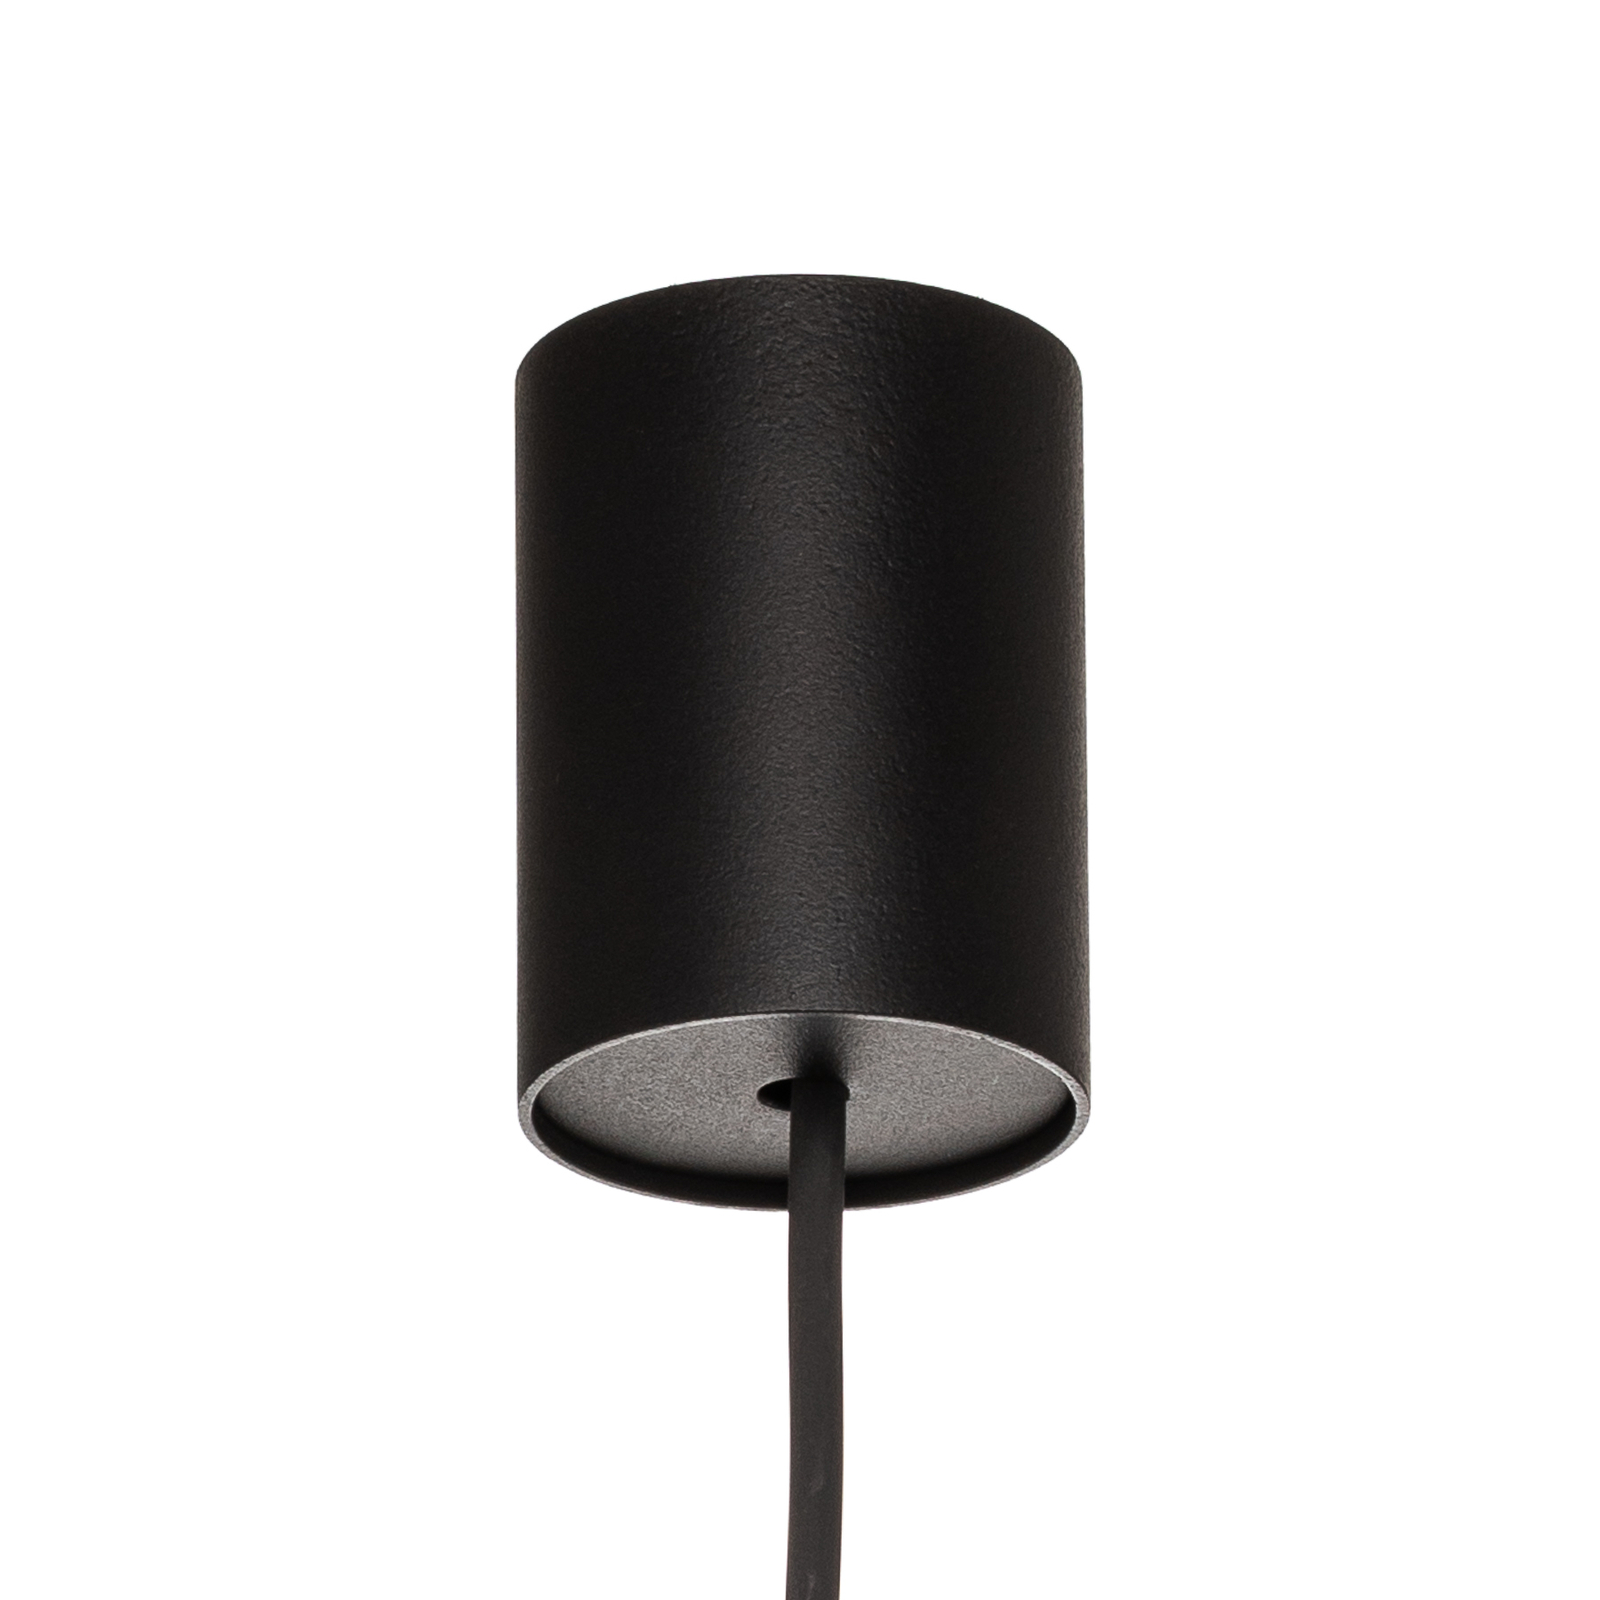 Pear M pendant light with glass shade, black